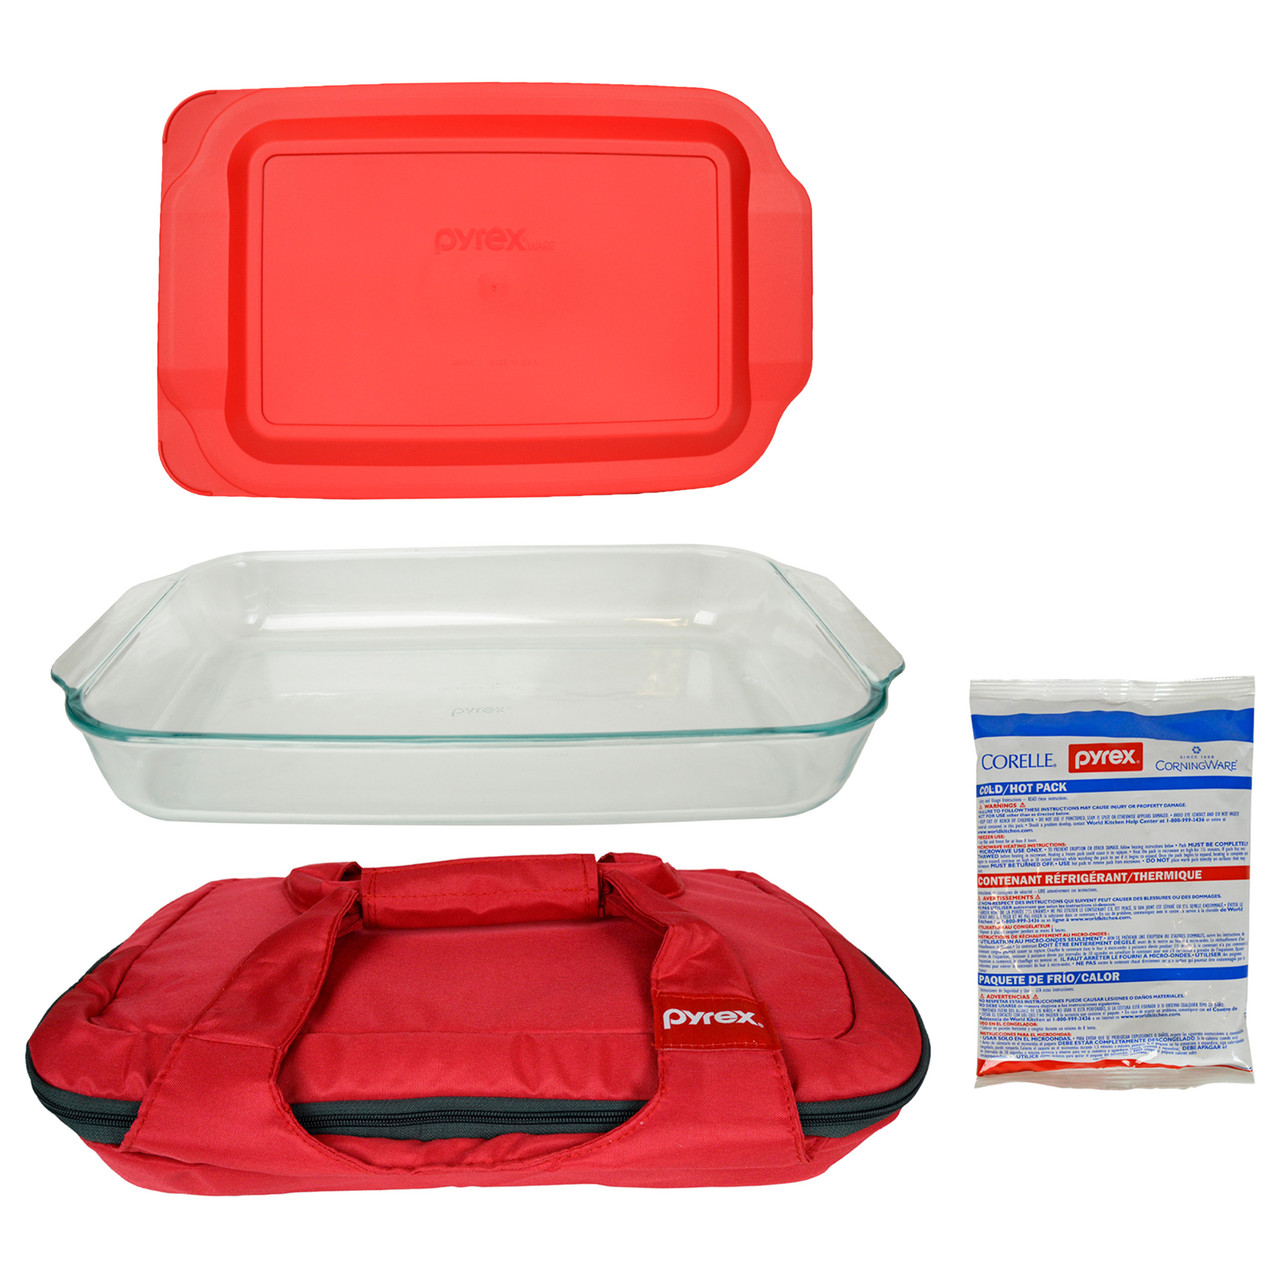 Pyrex Portable Black/Red Insulated Casserole Carrier for Hot or Cold Food,  Holder for Picnic, Potluck, Cookout – Comes with (1) 233 Glass Baking